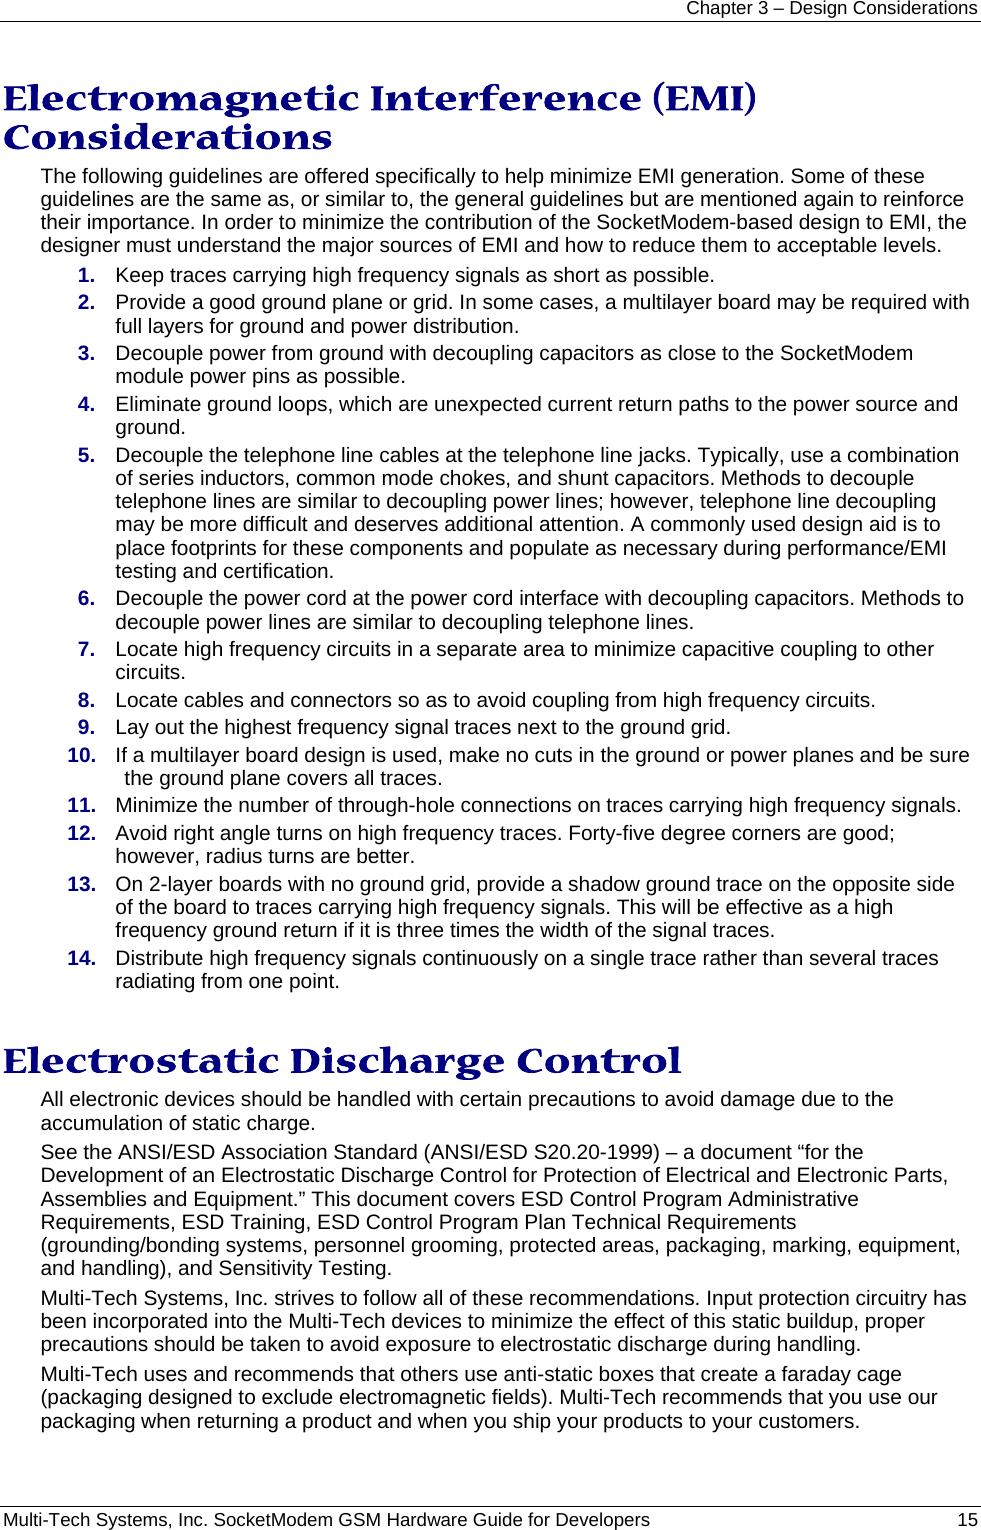 Chapter 3 – Design Considerations Multi-Tech Systems, Inc. SocketModem GSM Hardware Guide for Developers   15  Electromagnetic Interference (EMI) Considerations The following guidelines are offered specifically to help minimize EMI generation. Some of these guidelines are the same as, or similar to, the general guidelines but are mentioned again to reinforce their importance. In order to minimize the contribution of the SocketModem-based design to EMI, the designer must understand the major sources of EMI and how to reduce them to acceptable levels.  1.  Keep traces carrying high frequency signals as short as possible. 2.  Provide a good ground plane or grid. In some cases, a multilayer board may be required with full layers for ground and power distribution. 3.  Decouple power from ground with decoupling capacitors as close to the SocketModem module power pins as possible. 4.  Eliminate ground loops, which are unexpected current return paths to the power source and ground. 5.  Decouple the telephone line cables at the telephone line jacks. Typically, use a combination of series inductors, common mode chokes, and shunt capacitors. Methods to decouple telephone lines are similar to decoupling power lines; however, telephone line decoupling may be more difficult and deserves additional attention. A commonly used design aid is to place footprints for these components and populate as necessary during performance/EMI testing and certification. 6.  Decouple the power cord at the power cord interface with decoupling capacitors. Methods to decouple power lines are similar to decoupling telephone lines. 7.  Locate high frequency circuits in a separate area to minimize capacitive coupling to other circuits. 8.  Locate cables and connectors so as to avoid coupling from high frequency circuits. 9.  Lay out the highest frequency signal traces next to the ground grid. 10.  If a multilayer board design is used, make no cuts in the ground or power planes and be sure the ground plane covers all traces. 11.  Minimize the number of through-hole connections on traces carrying high frequency signals. 12.  Avoid right angle turns on high frequency traces. Forty-five degree corners are good; however, radius turns are better. 13.  On 2-layer boards with no ground grid, provide a shadow ground trace on the opposite side of the board to traces carrying high frequency signals. This will be effective as a high frequency ground return if it is three times the width of the signal traces. 14.  Distribute high frequency signals continuously on a single trace rather than several traces radiating from one point.  Electrostatic Discharge Control All electronic devices should be handled with certain precautions to avoid damage due to the accumulation of static charge.  See the ANSI/ESD Association Standard (ANSI/ESD S20.20-1999) – a document “for the Development of an Electrostatic Discharge Control for Protection of Electrical and Electronic Parts, Assemblies and Equipment.” This document covers ESD Control Program Administrative Requirements, ESD Training, ESD Control Program Plan Technical Requirements (grounding/bonding systems, personnel grooming, protected areas, packaging, marking, equipment, and handling), and Sensitivity Testing. Multi-Tech Systems, Inc. strives to follow all of these recommendations. Input protection circuitry has been incorporated into the Multi-Tech devices to minimize the effect of this static buildup, proper precautions should be taken to avoid exposure to electrostatic discharge during handling.  Multi-Tech uses and recommends that others use anti-static boxes that create a faraday cage (packaging designed to exclude electromagnetic fields). Multi-Tech recommends that you use our packaging when returning a product and when you ship your products to your customers.